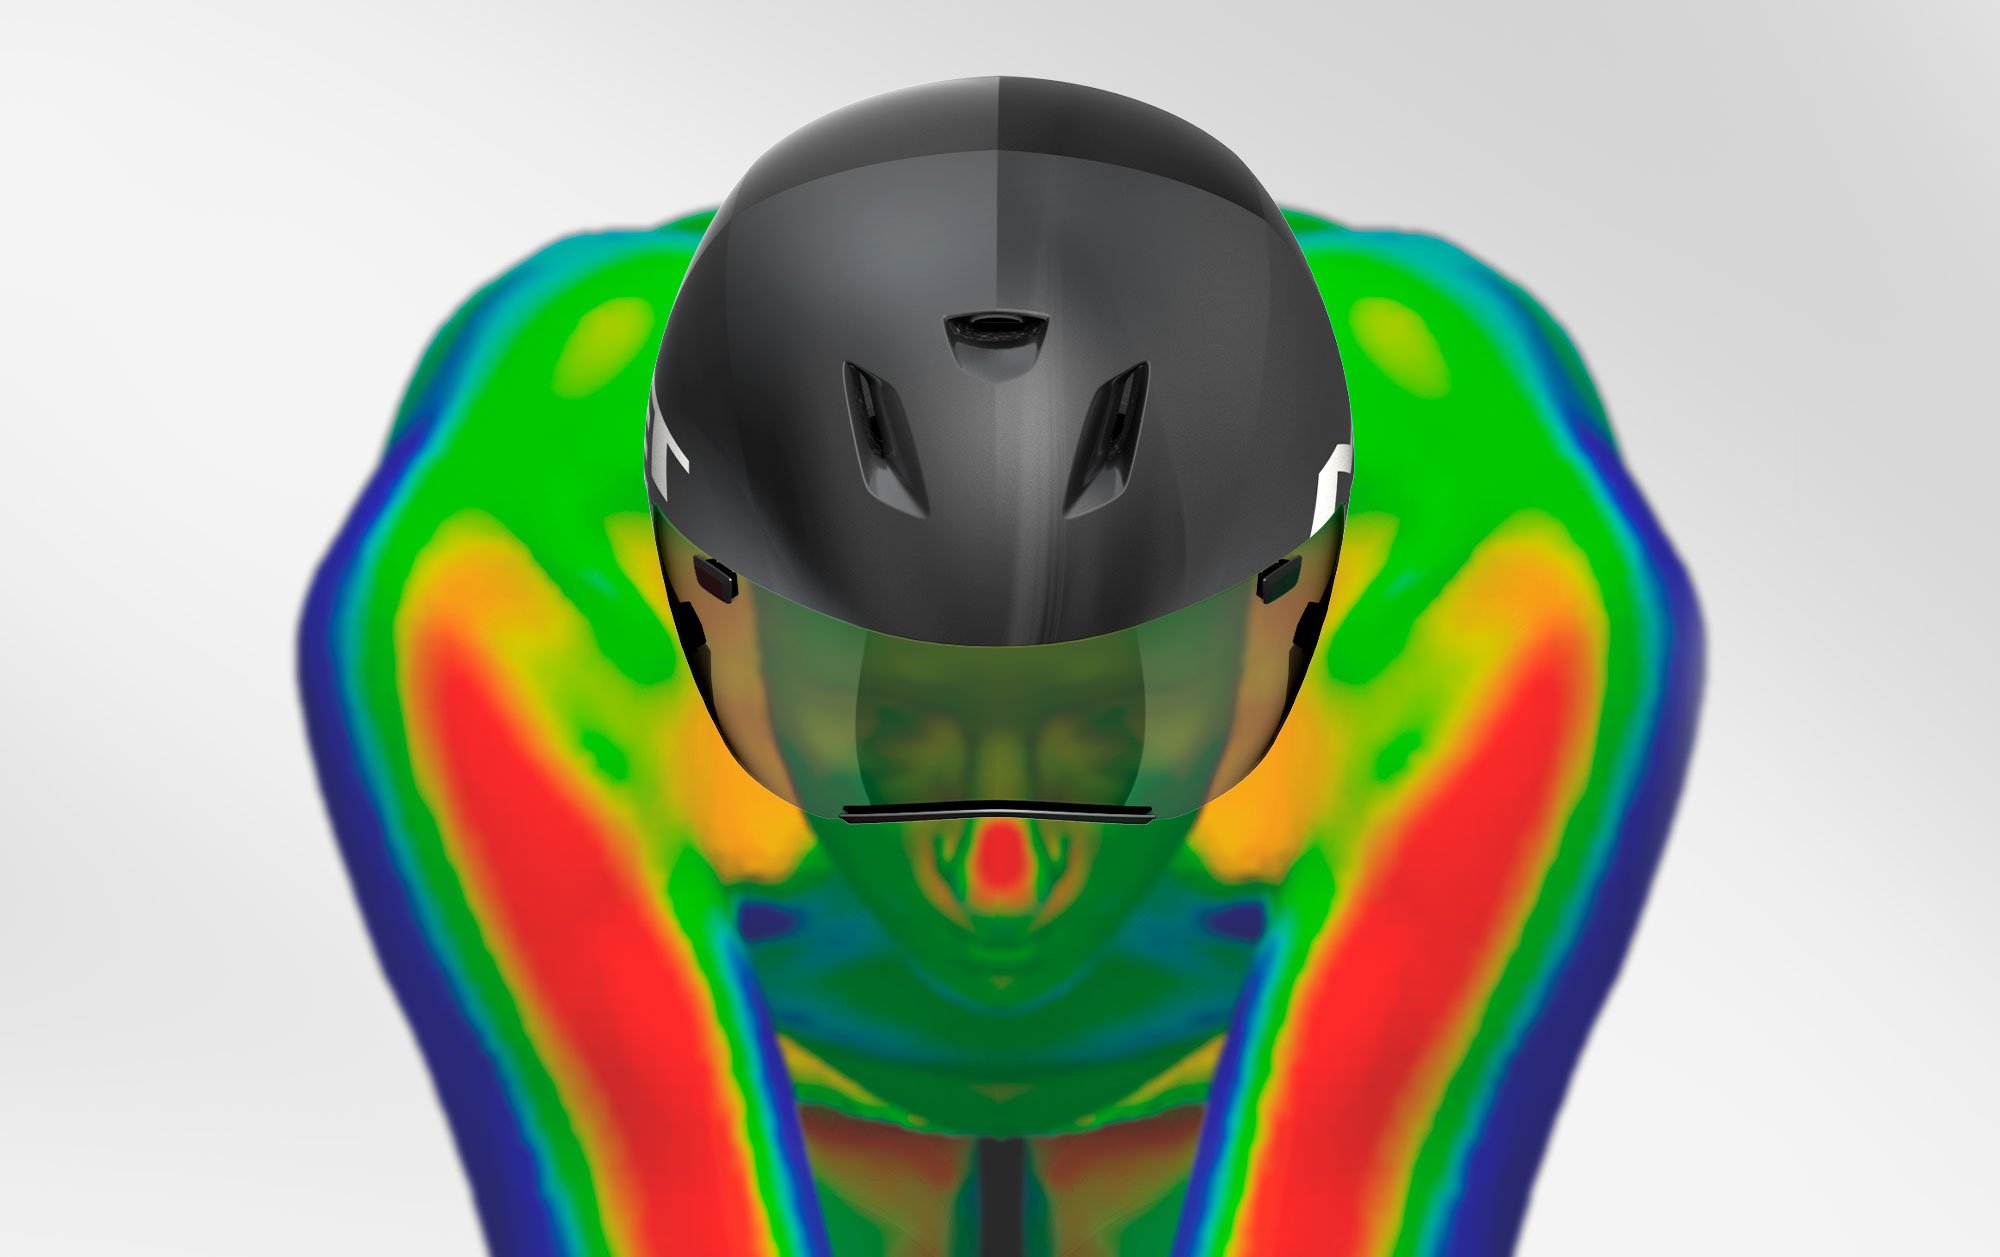 MET Codatronca is an Aero Helmet for Triathlon and Time Trial with Wide Body Construction